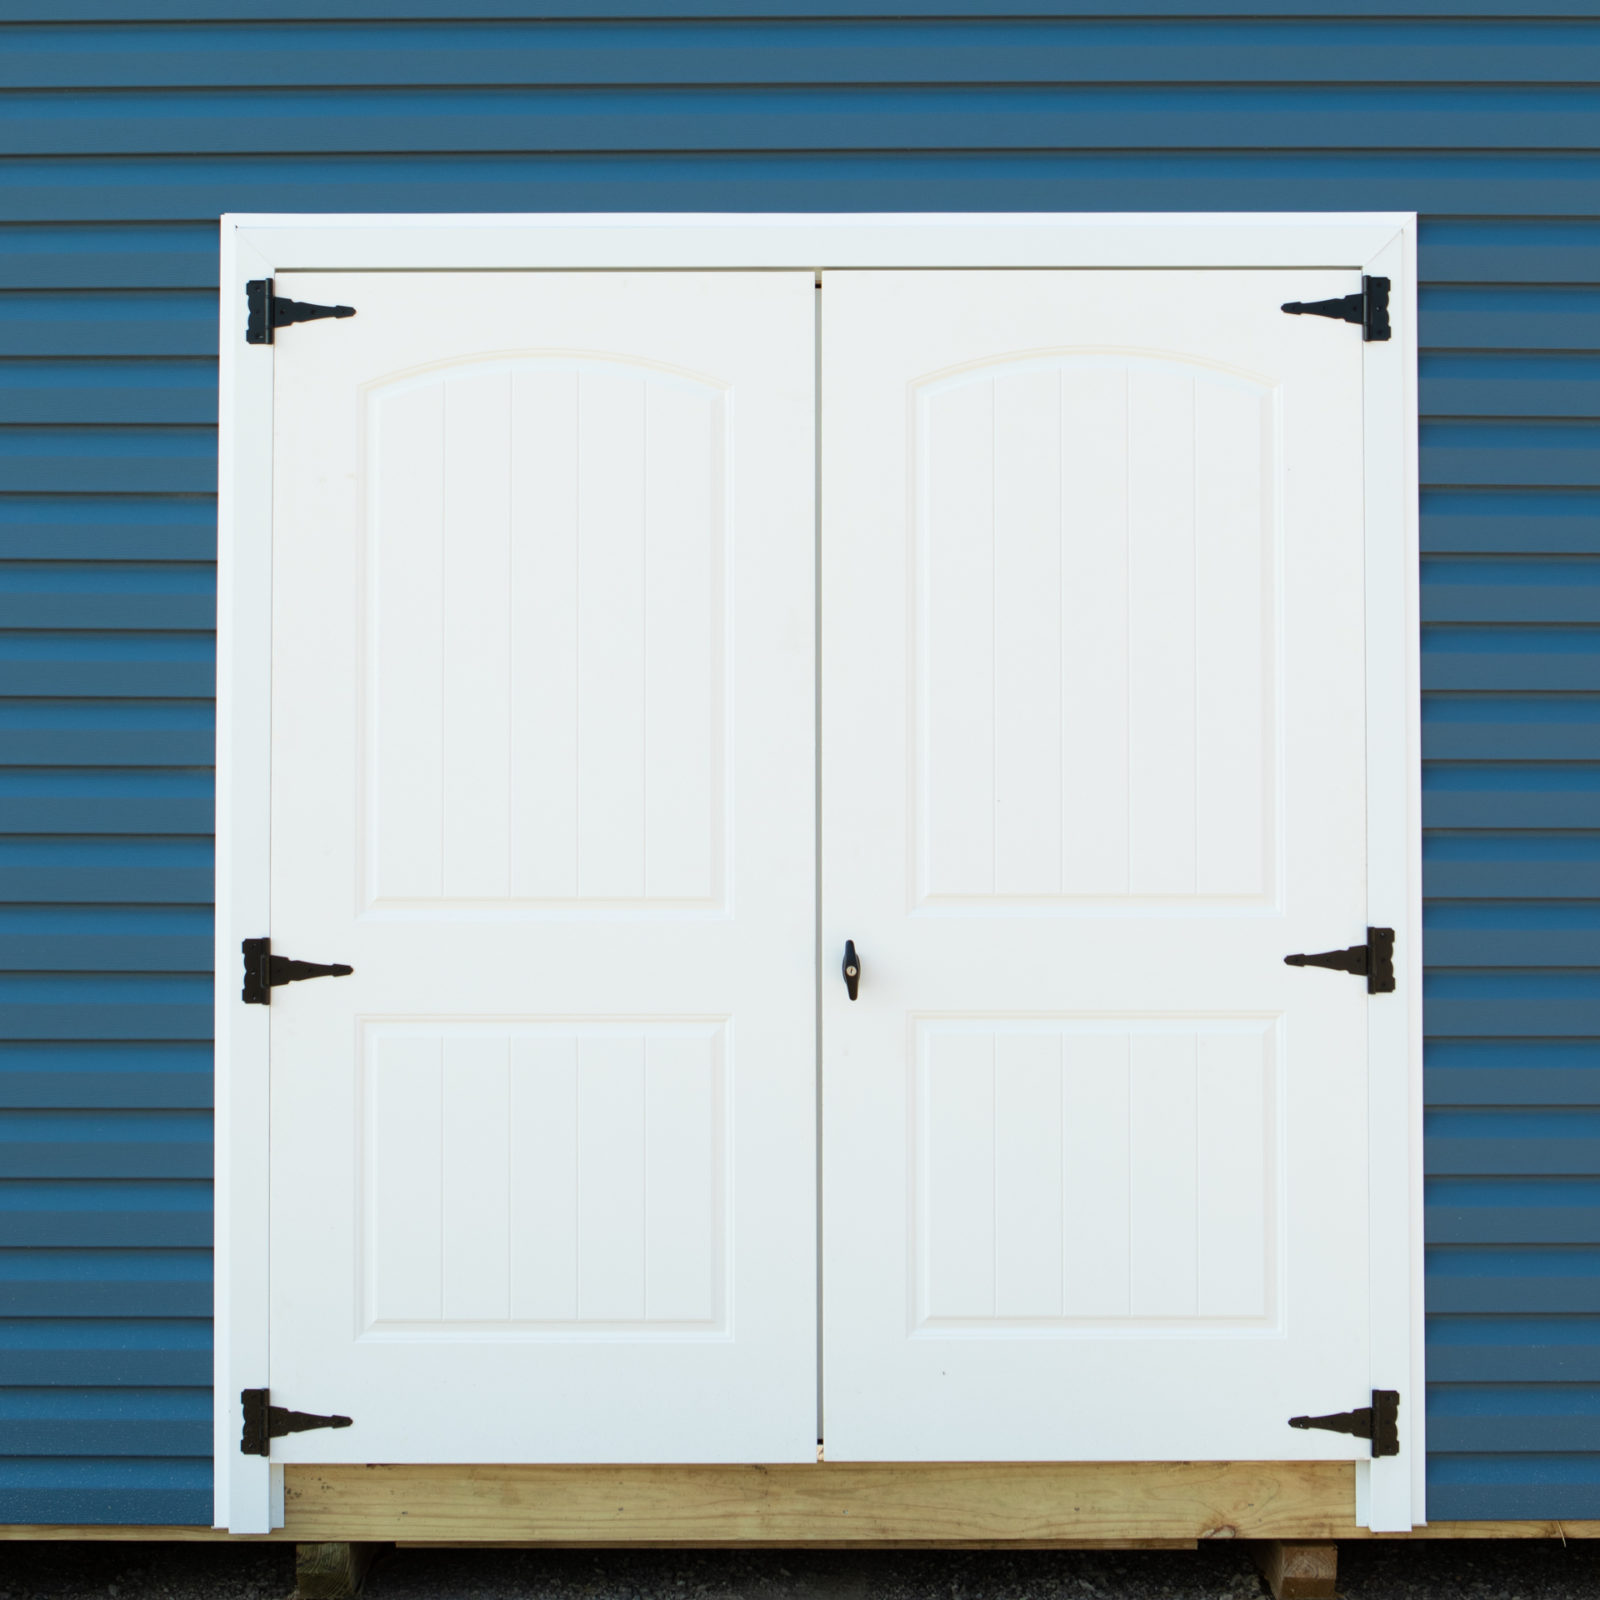 exterior of fiberglass door for vinyl sheds for sale in KY and TN